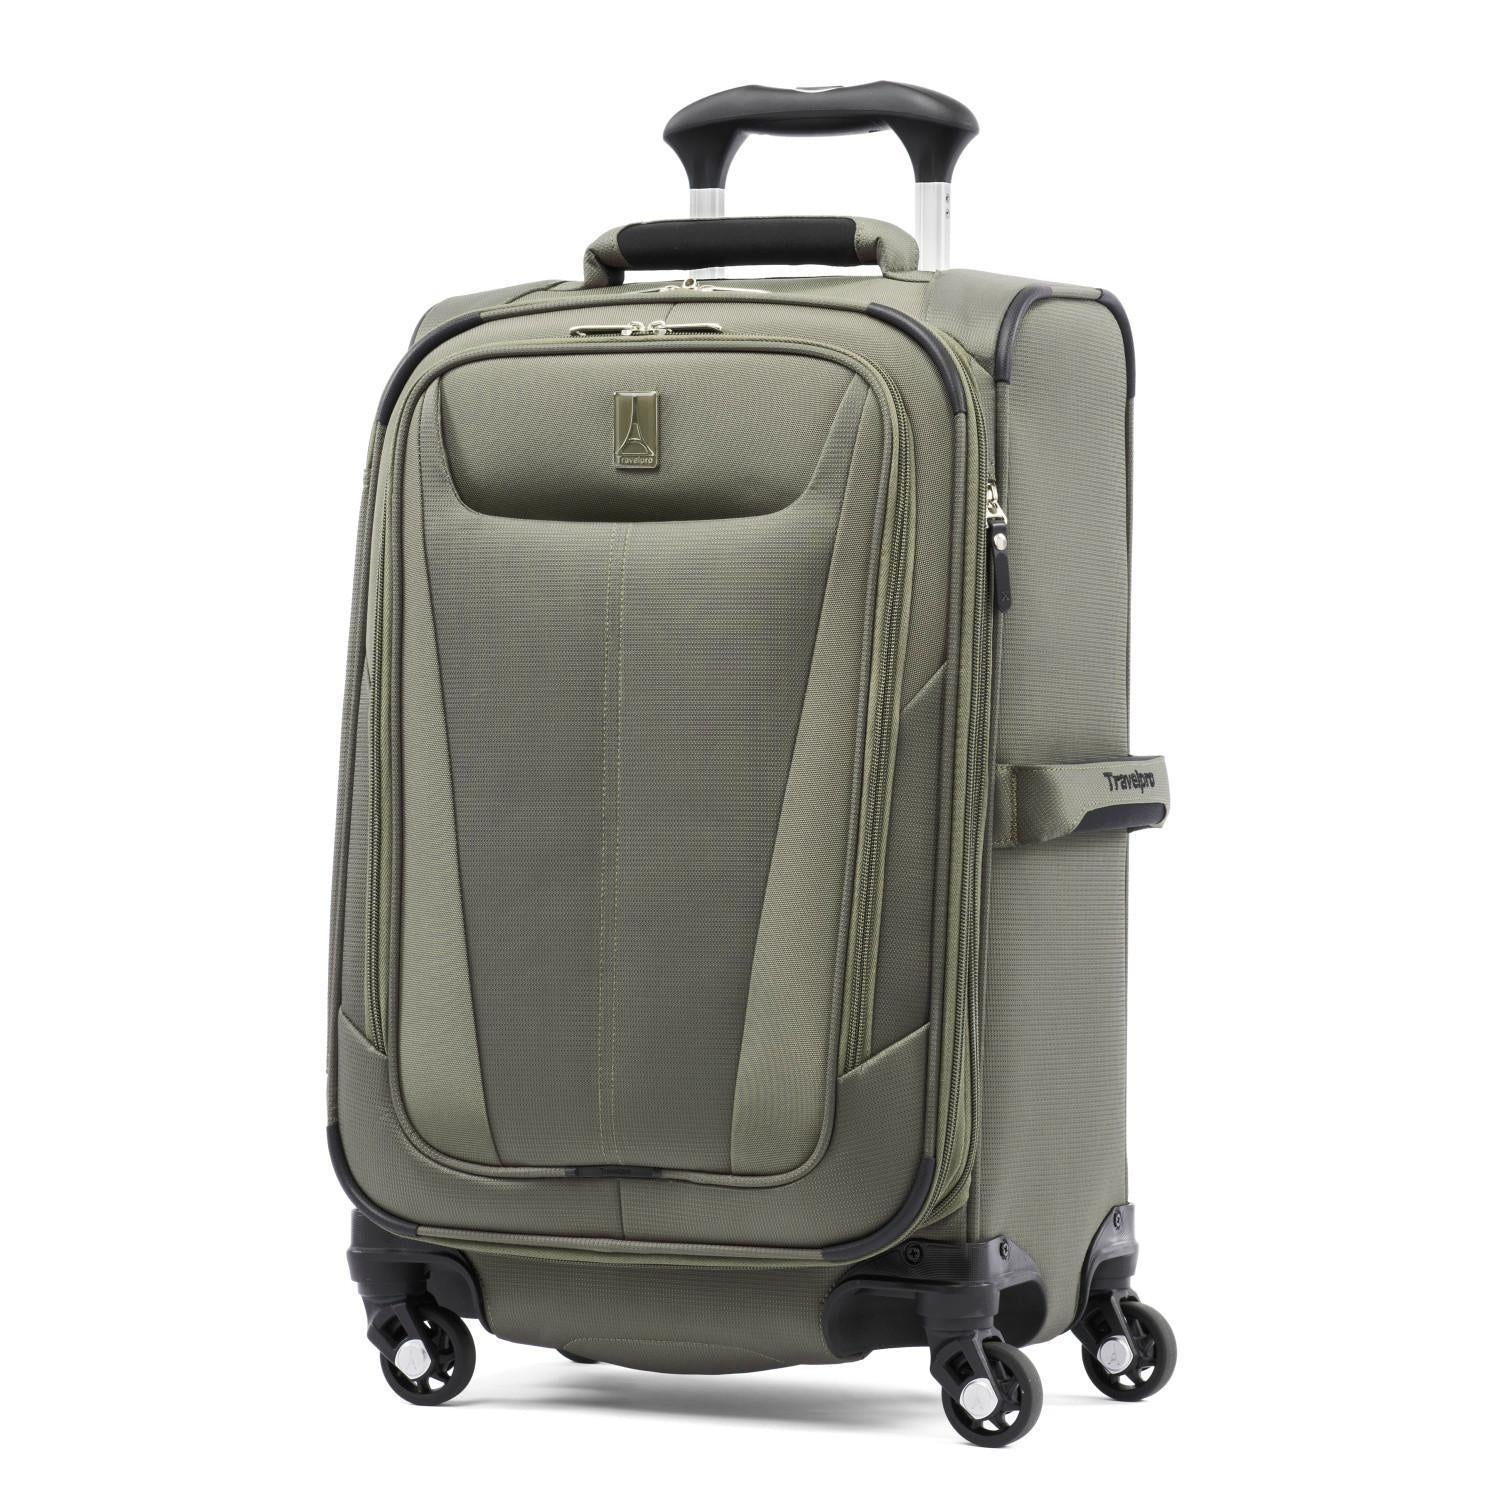 Travelpro Maxlite 5 Lightweight 21" Expandable Carry-On Spinner